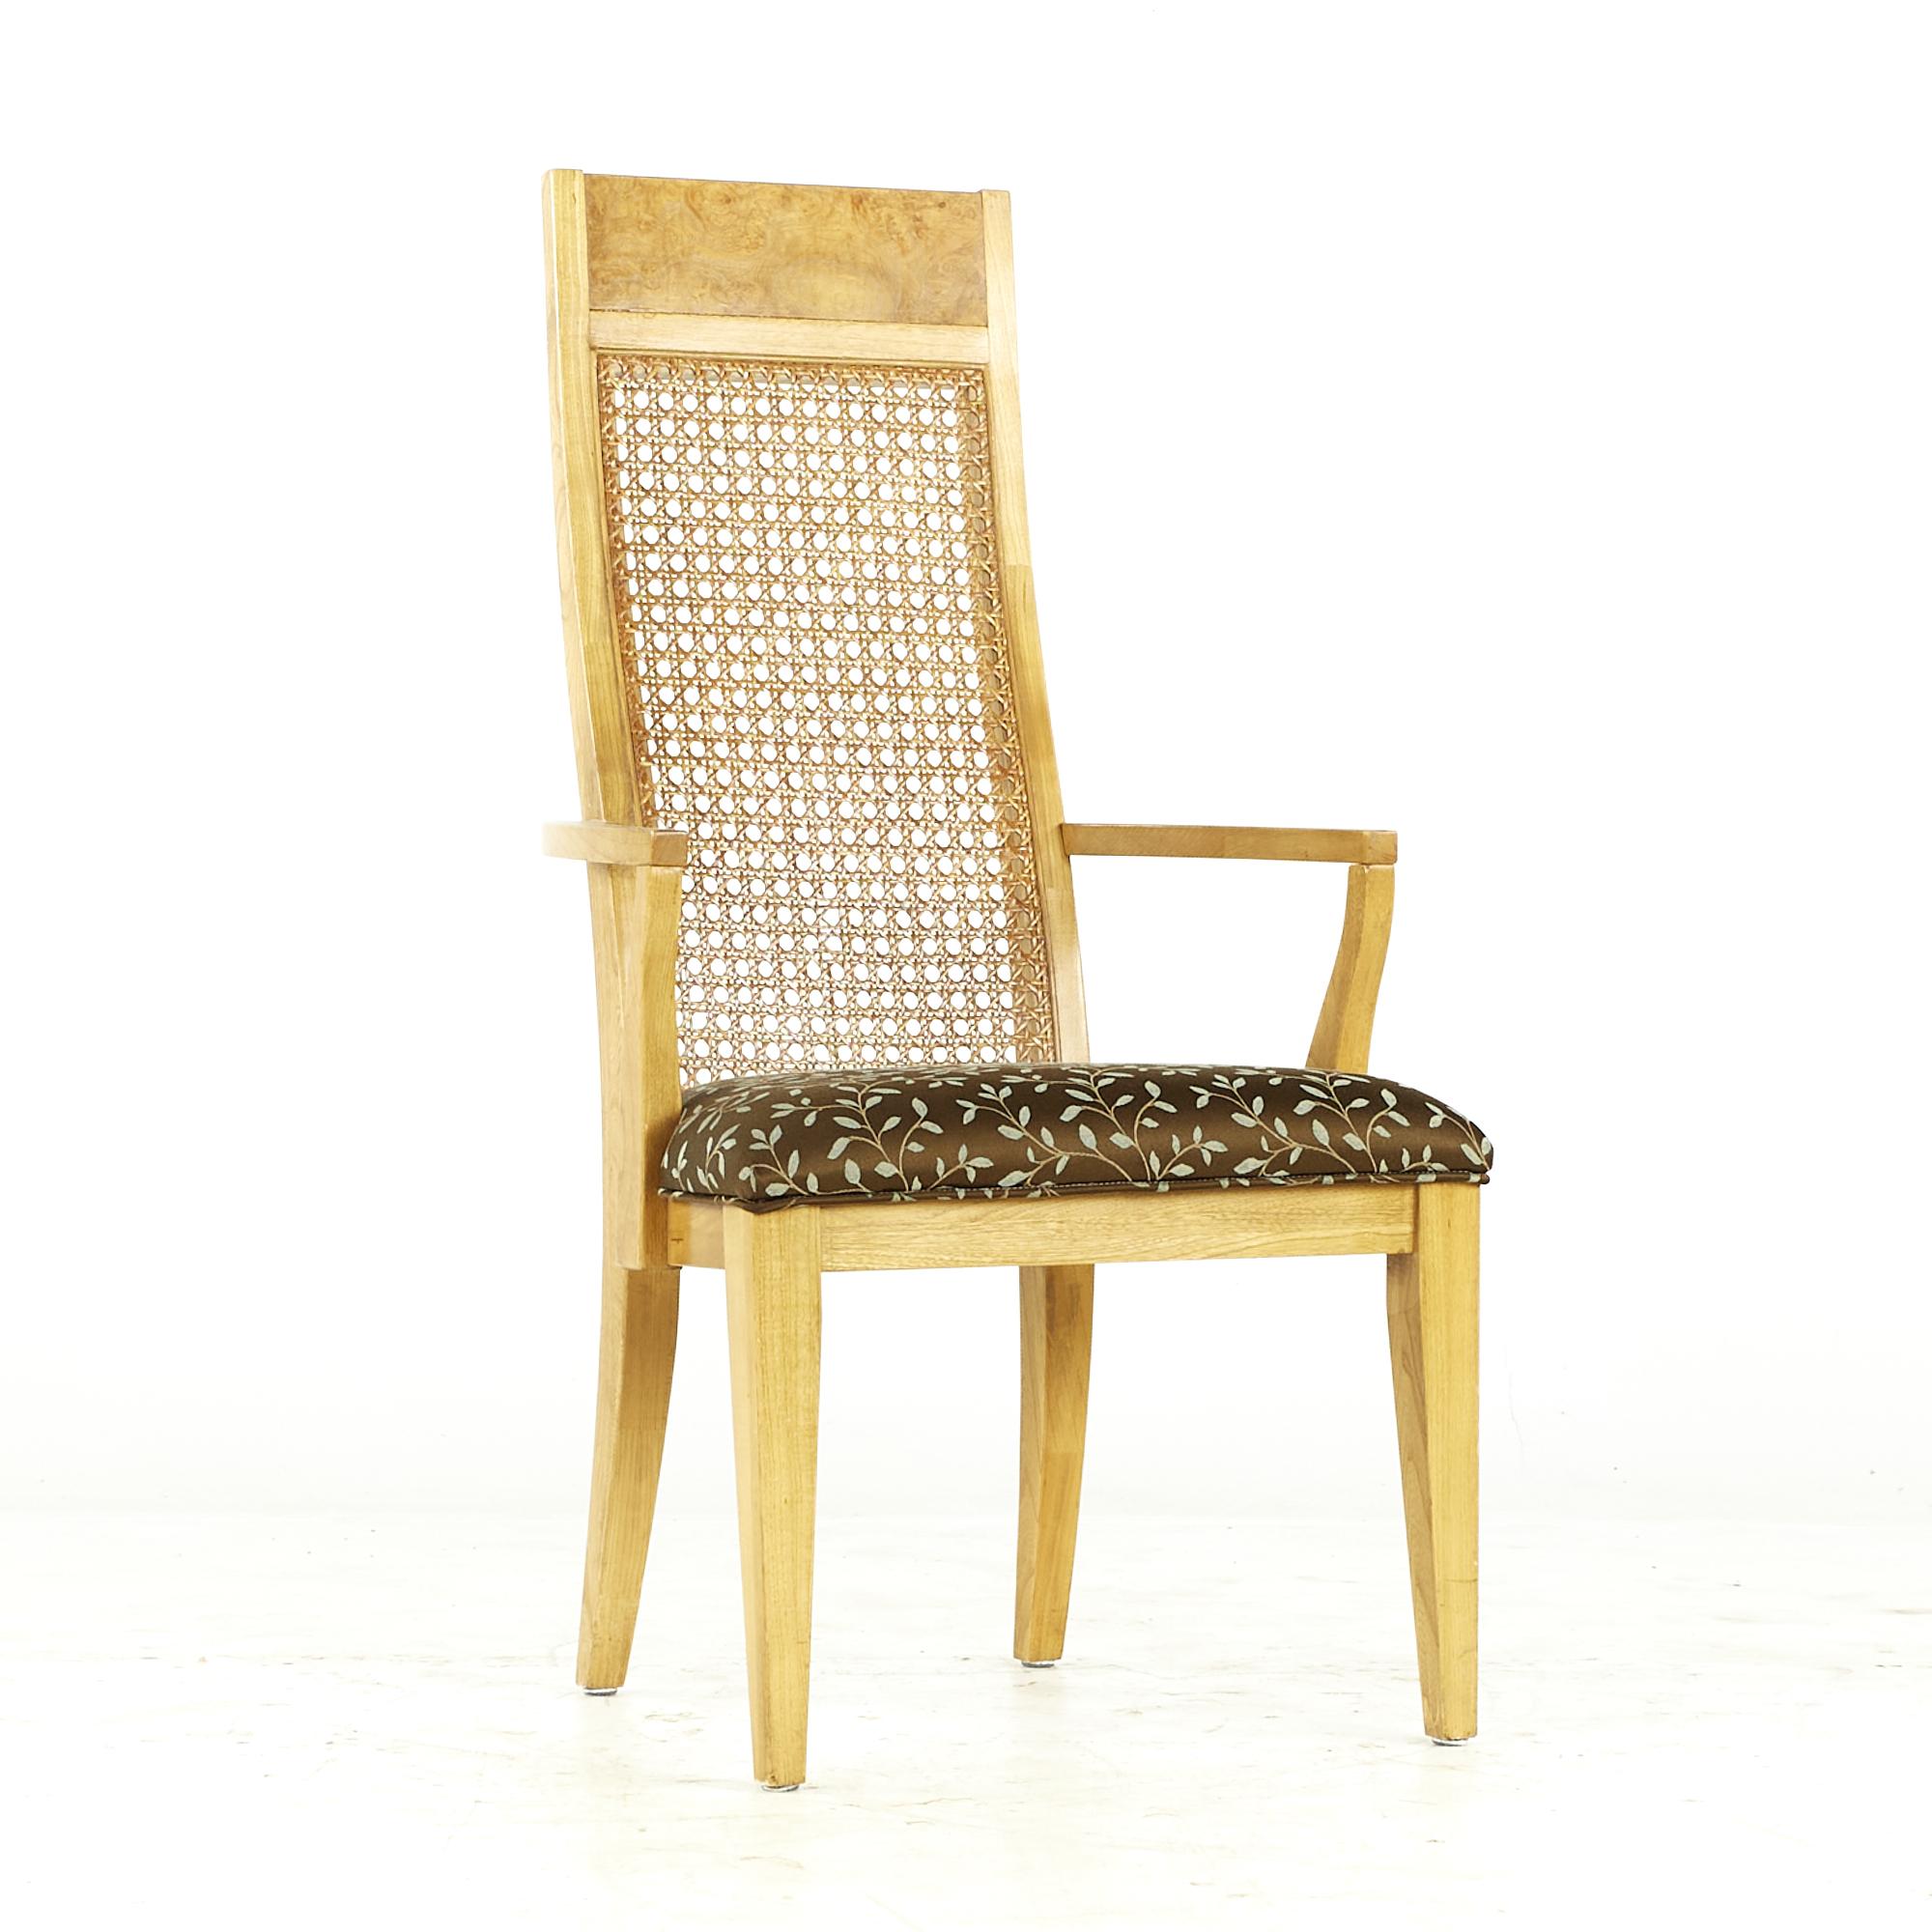 American Lane Midcentury Burlwood and Cane Dining Chairs, Set of 6 For Sale